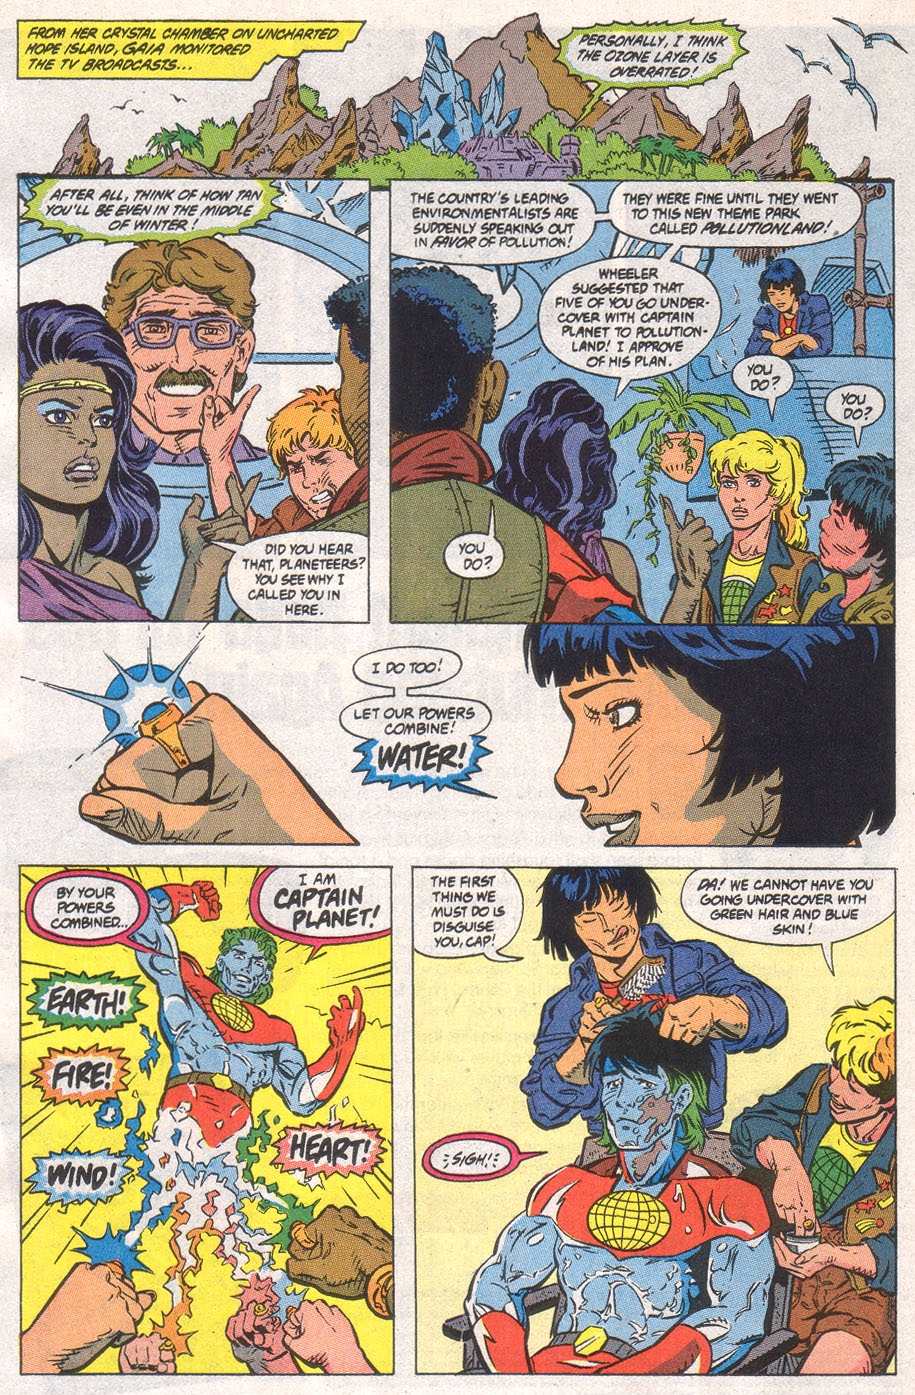 Captain Planet and the Planeteers 5 Page 6